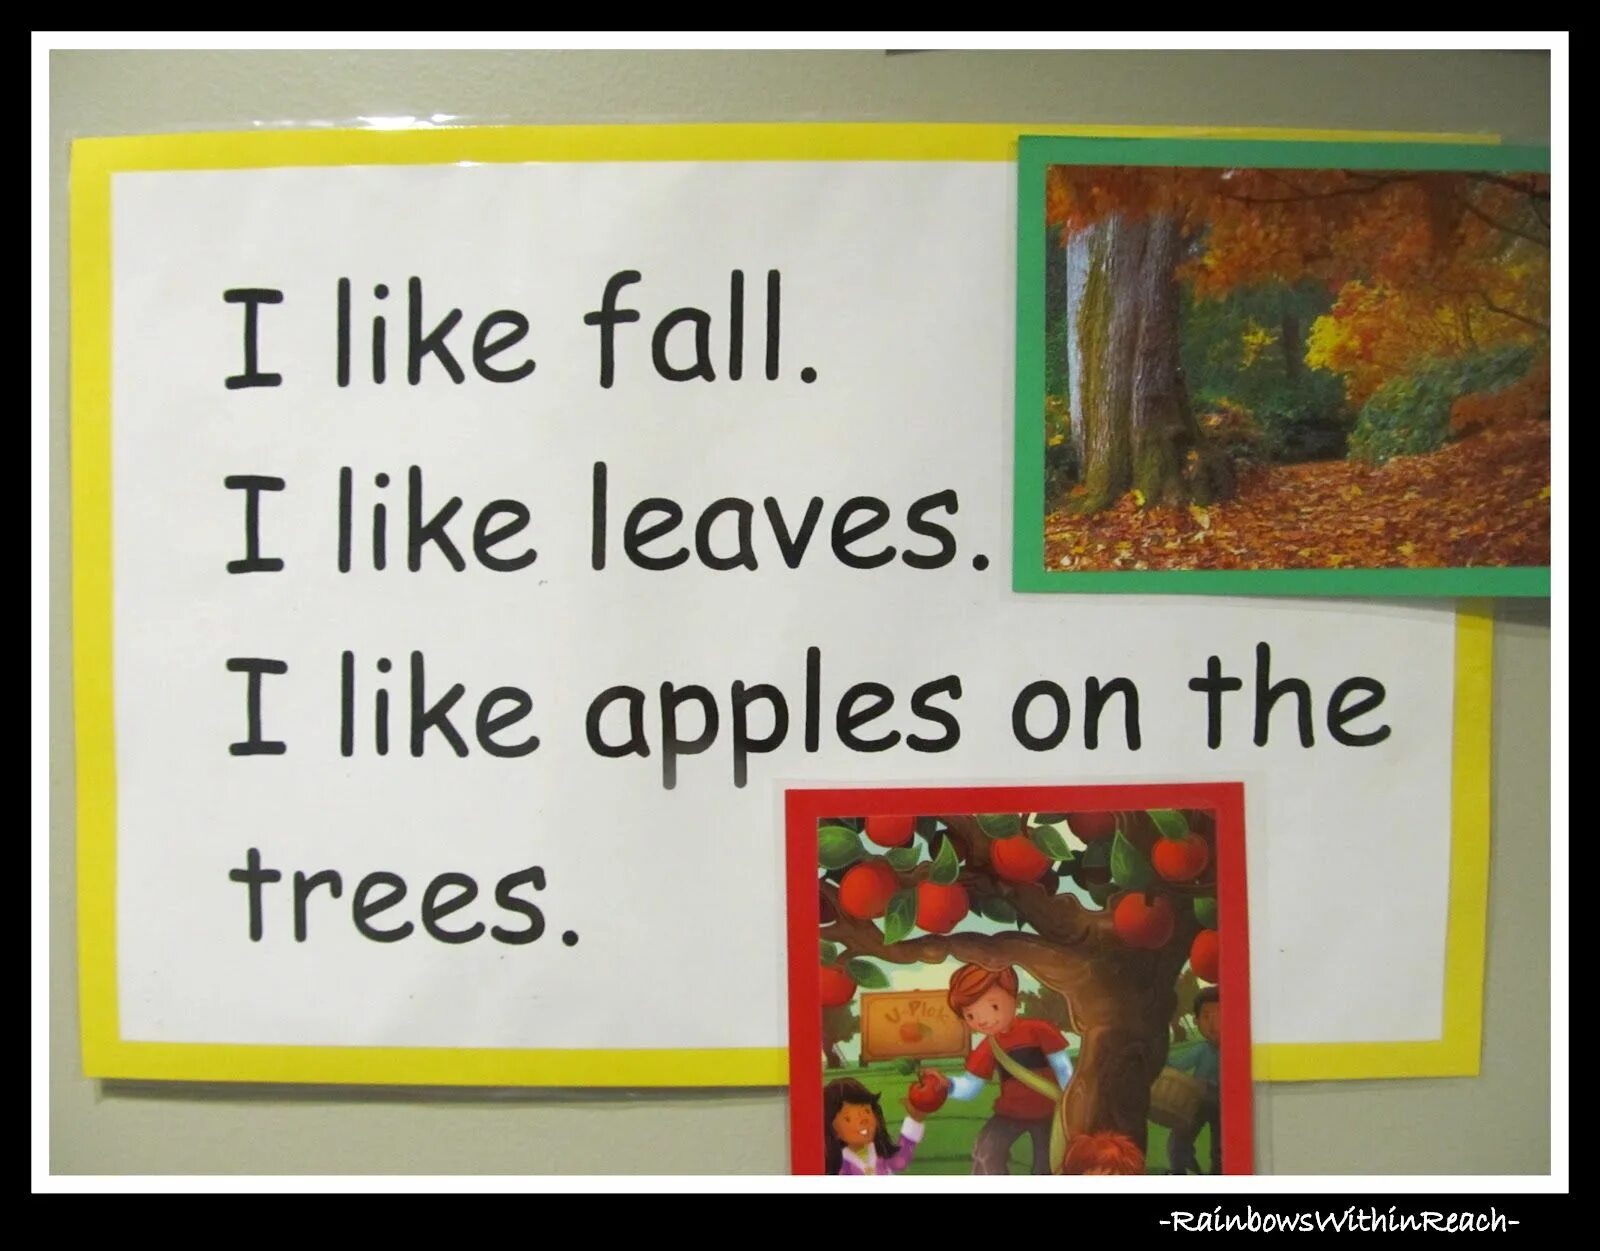 Falling like. Autumn Rhymes. В английском Fall. Autumn leaves на английском. About autumn for Kids.